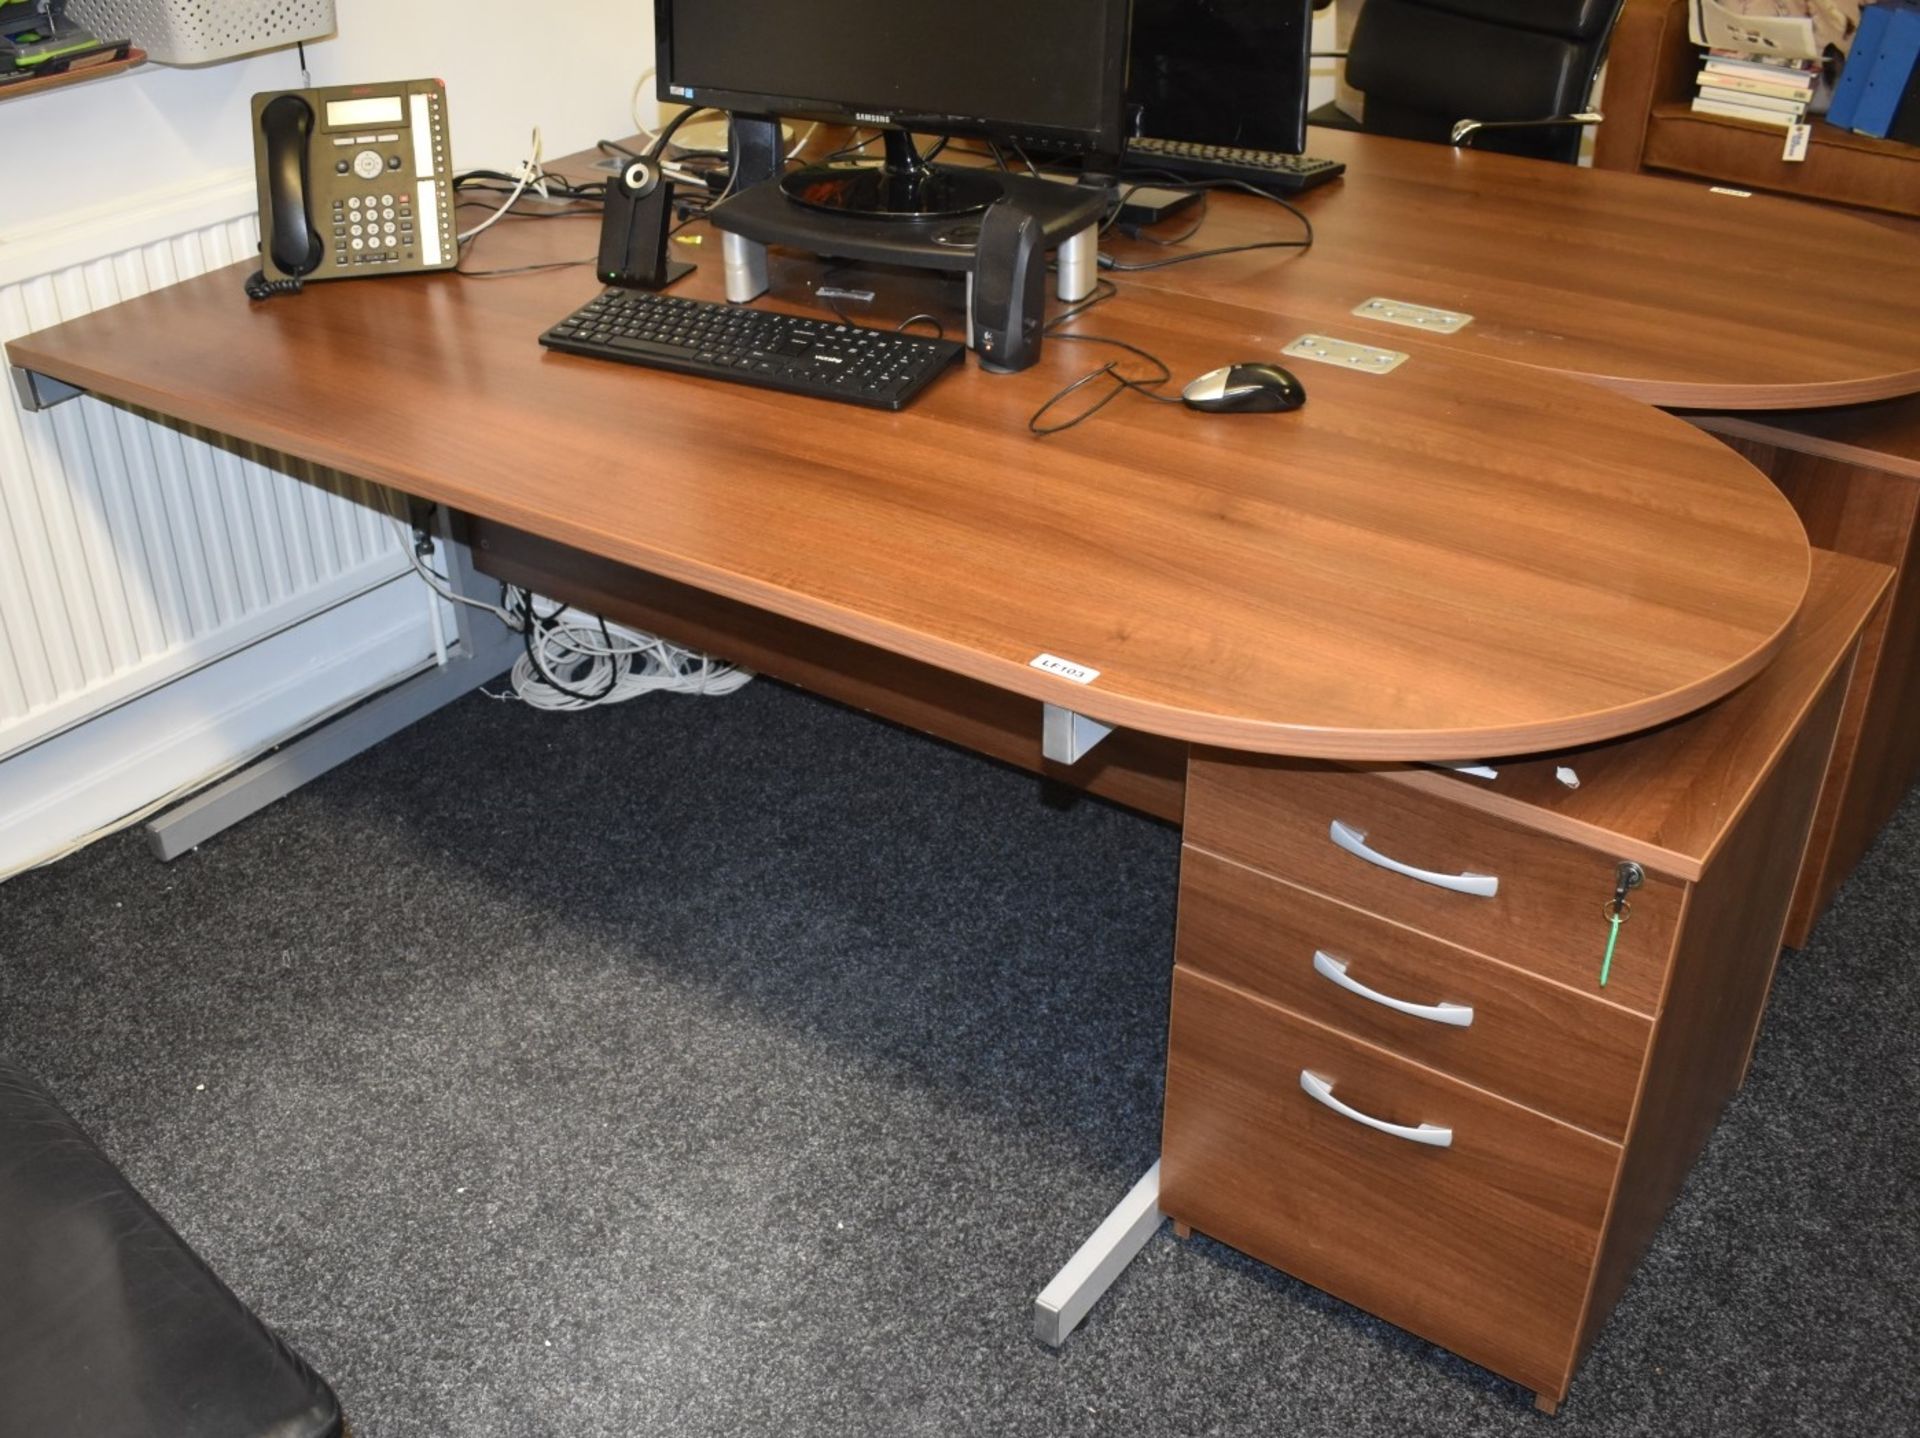 1 x Contemporary Office Desk - Features Semi Circle Meeting Point, Walnut Finish and Matching Drawer